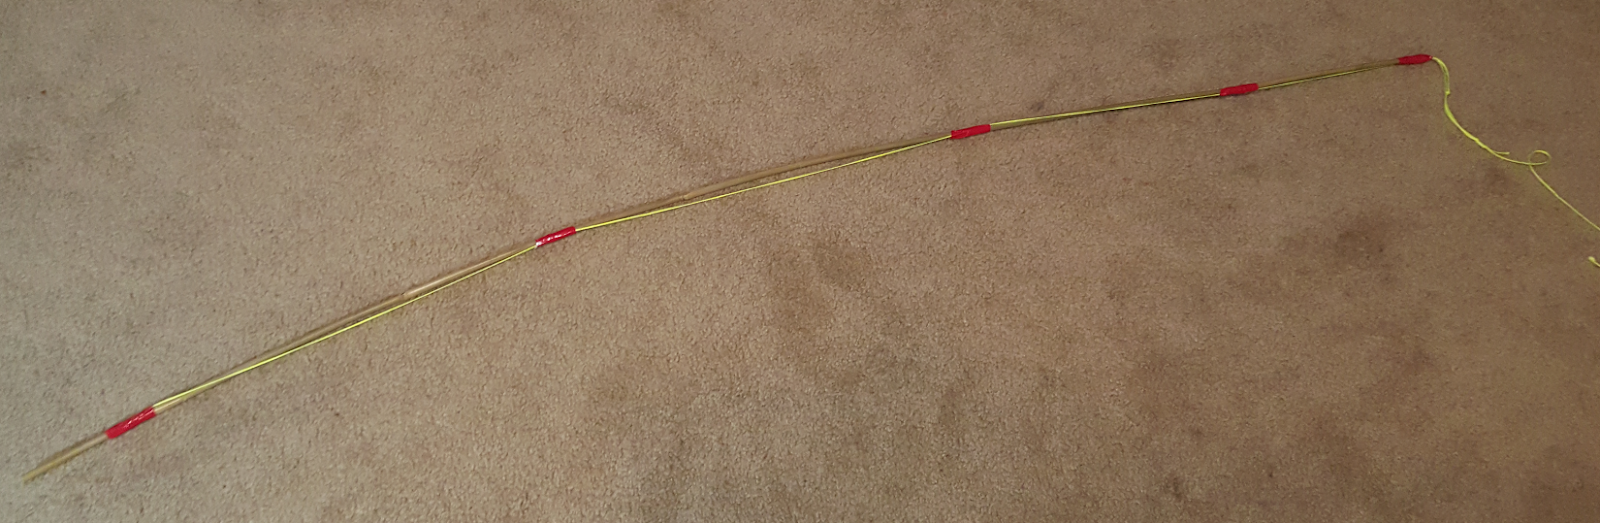 Scout Dad Texas: A Super Simple Bear Scout Fishing pole